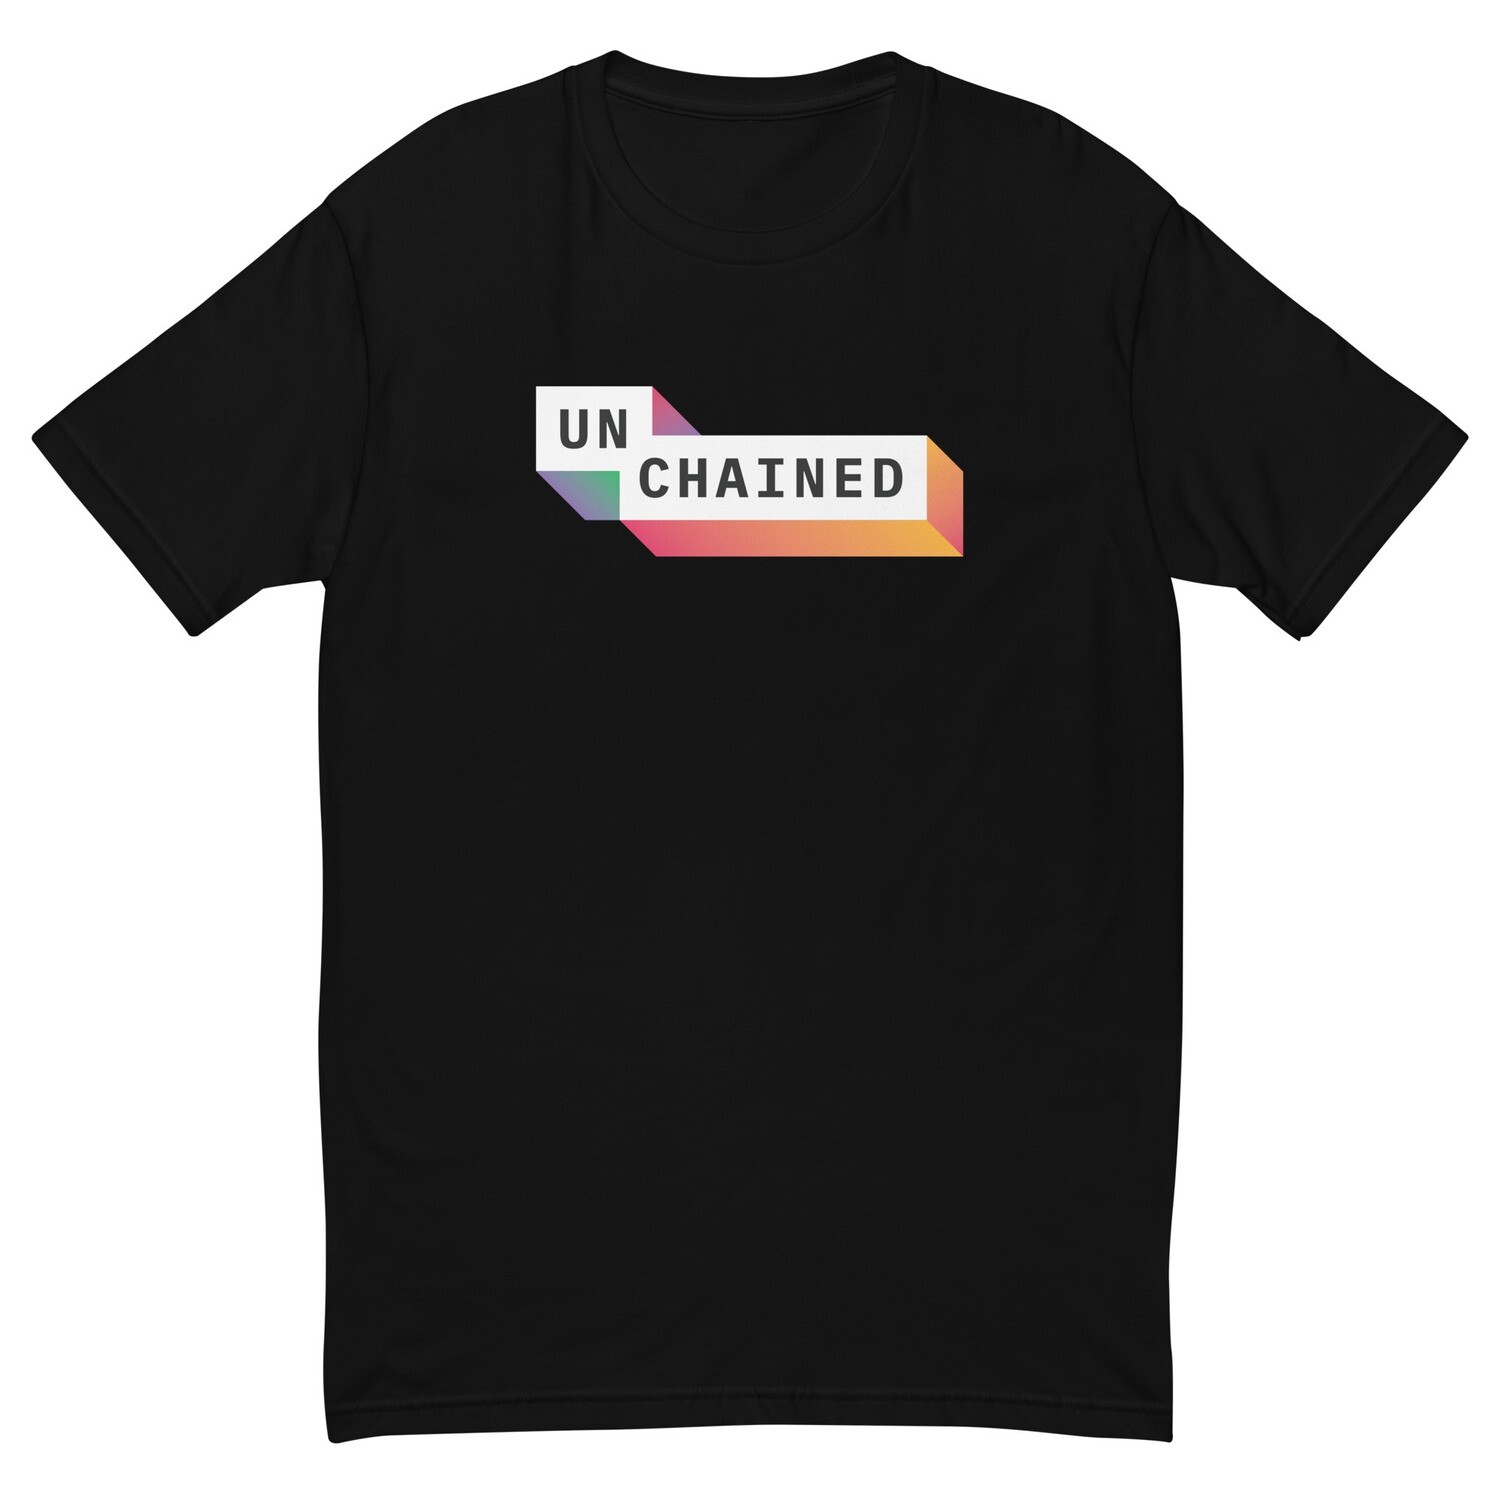 The Unchained T-Shirt -- Black